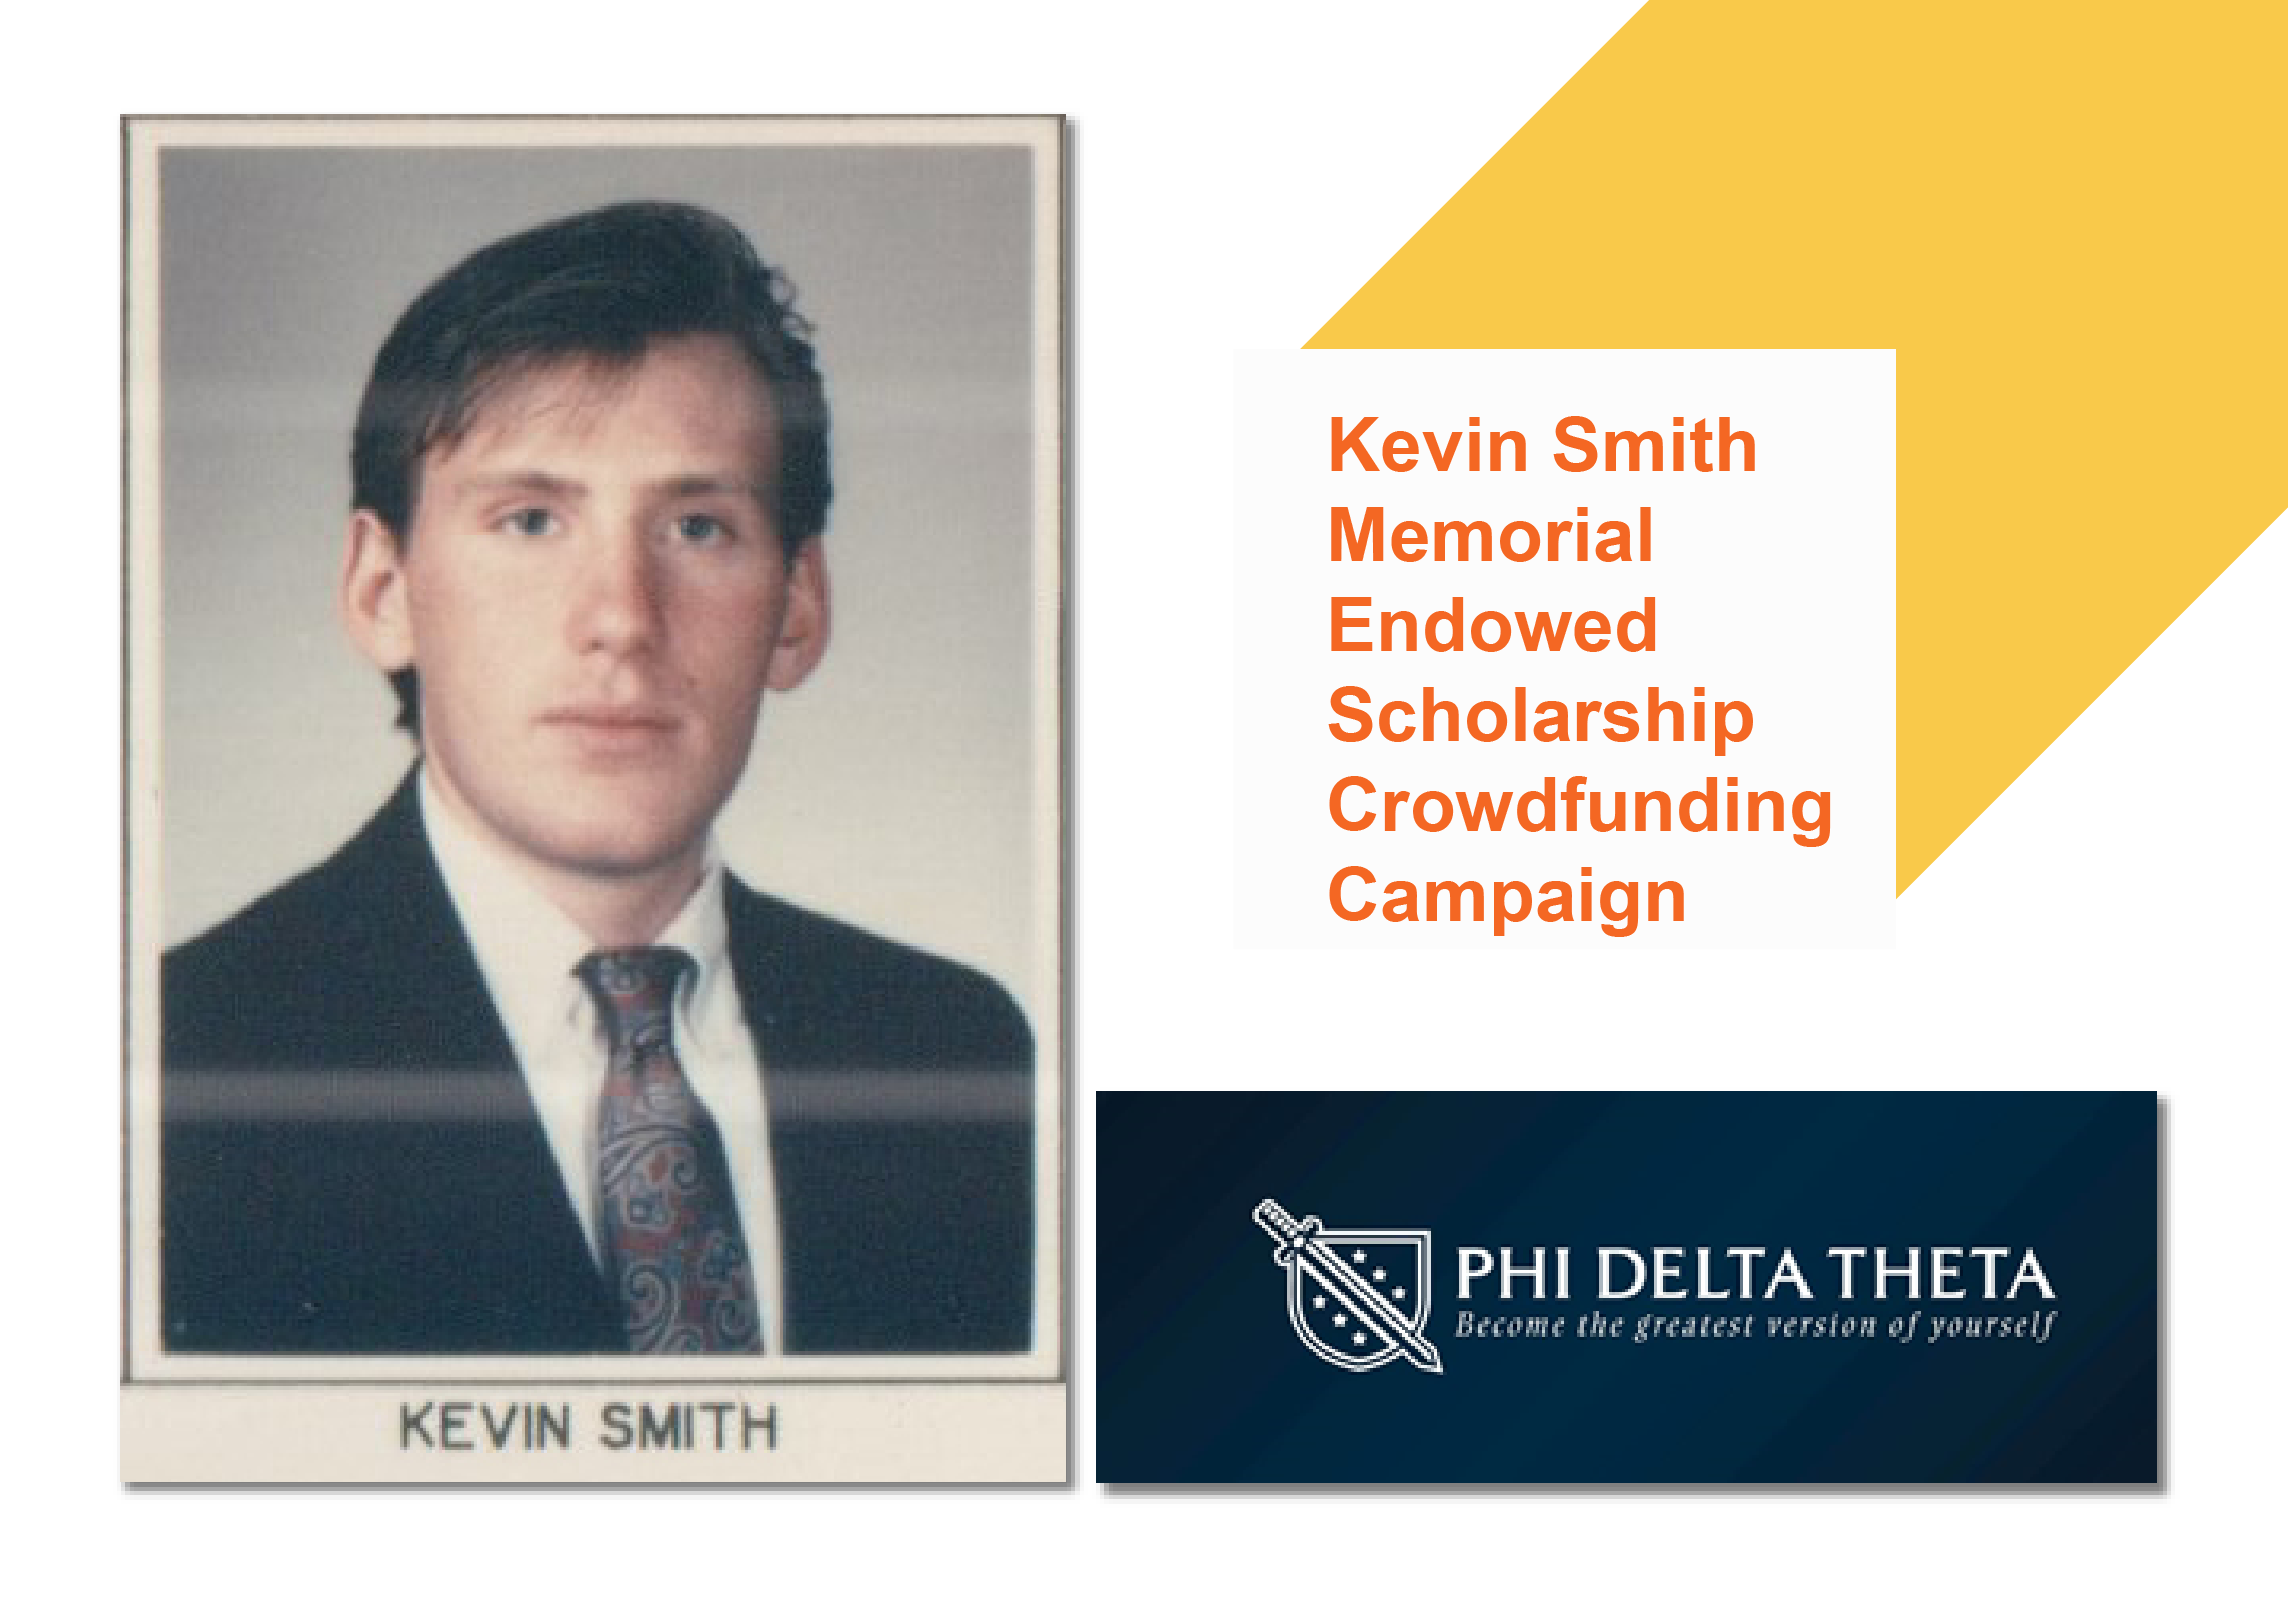 Kevin Smith Memorial Endowed Scholarship crowdfunding campaign